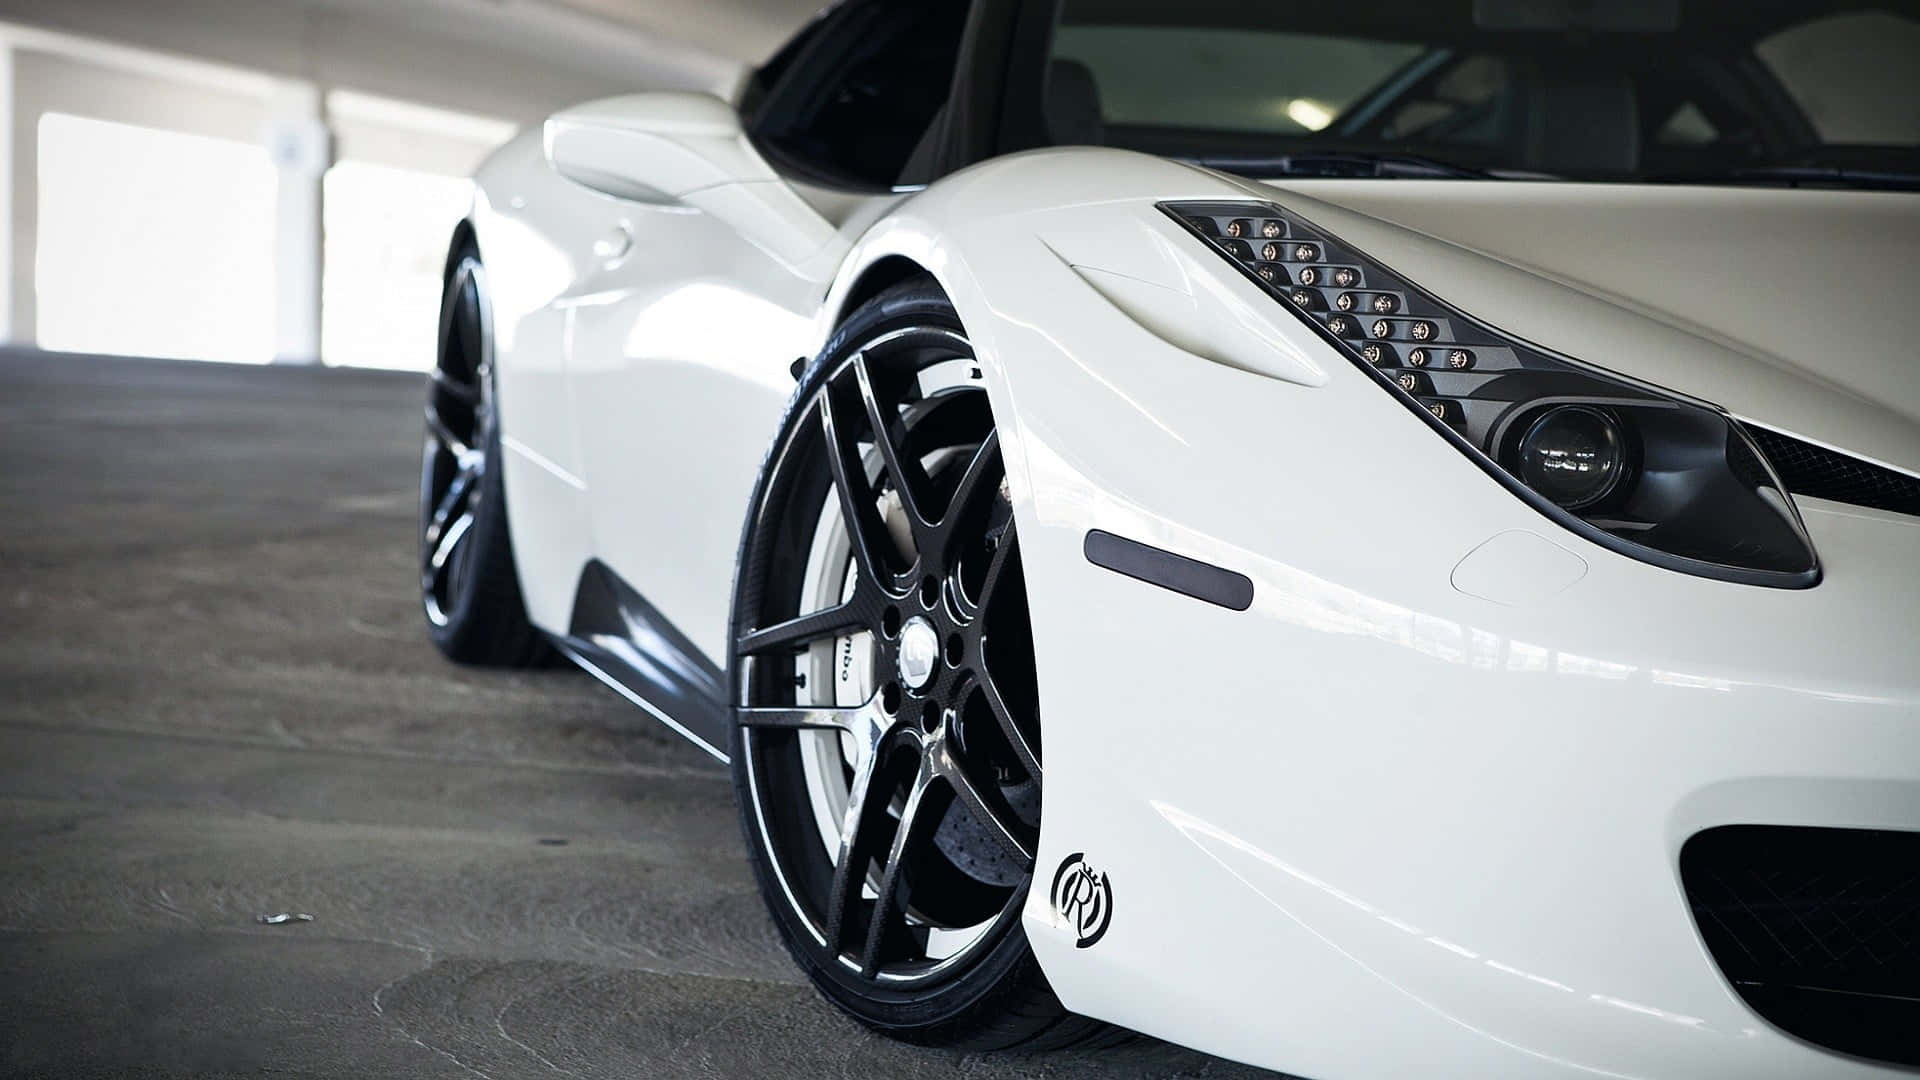 Experience the Luxury of the White Ferrari iPhone Wallpaper